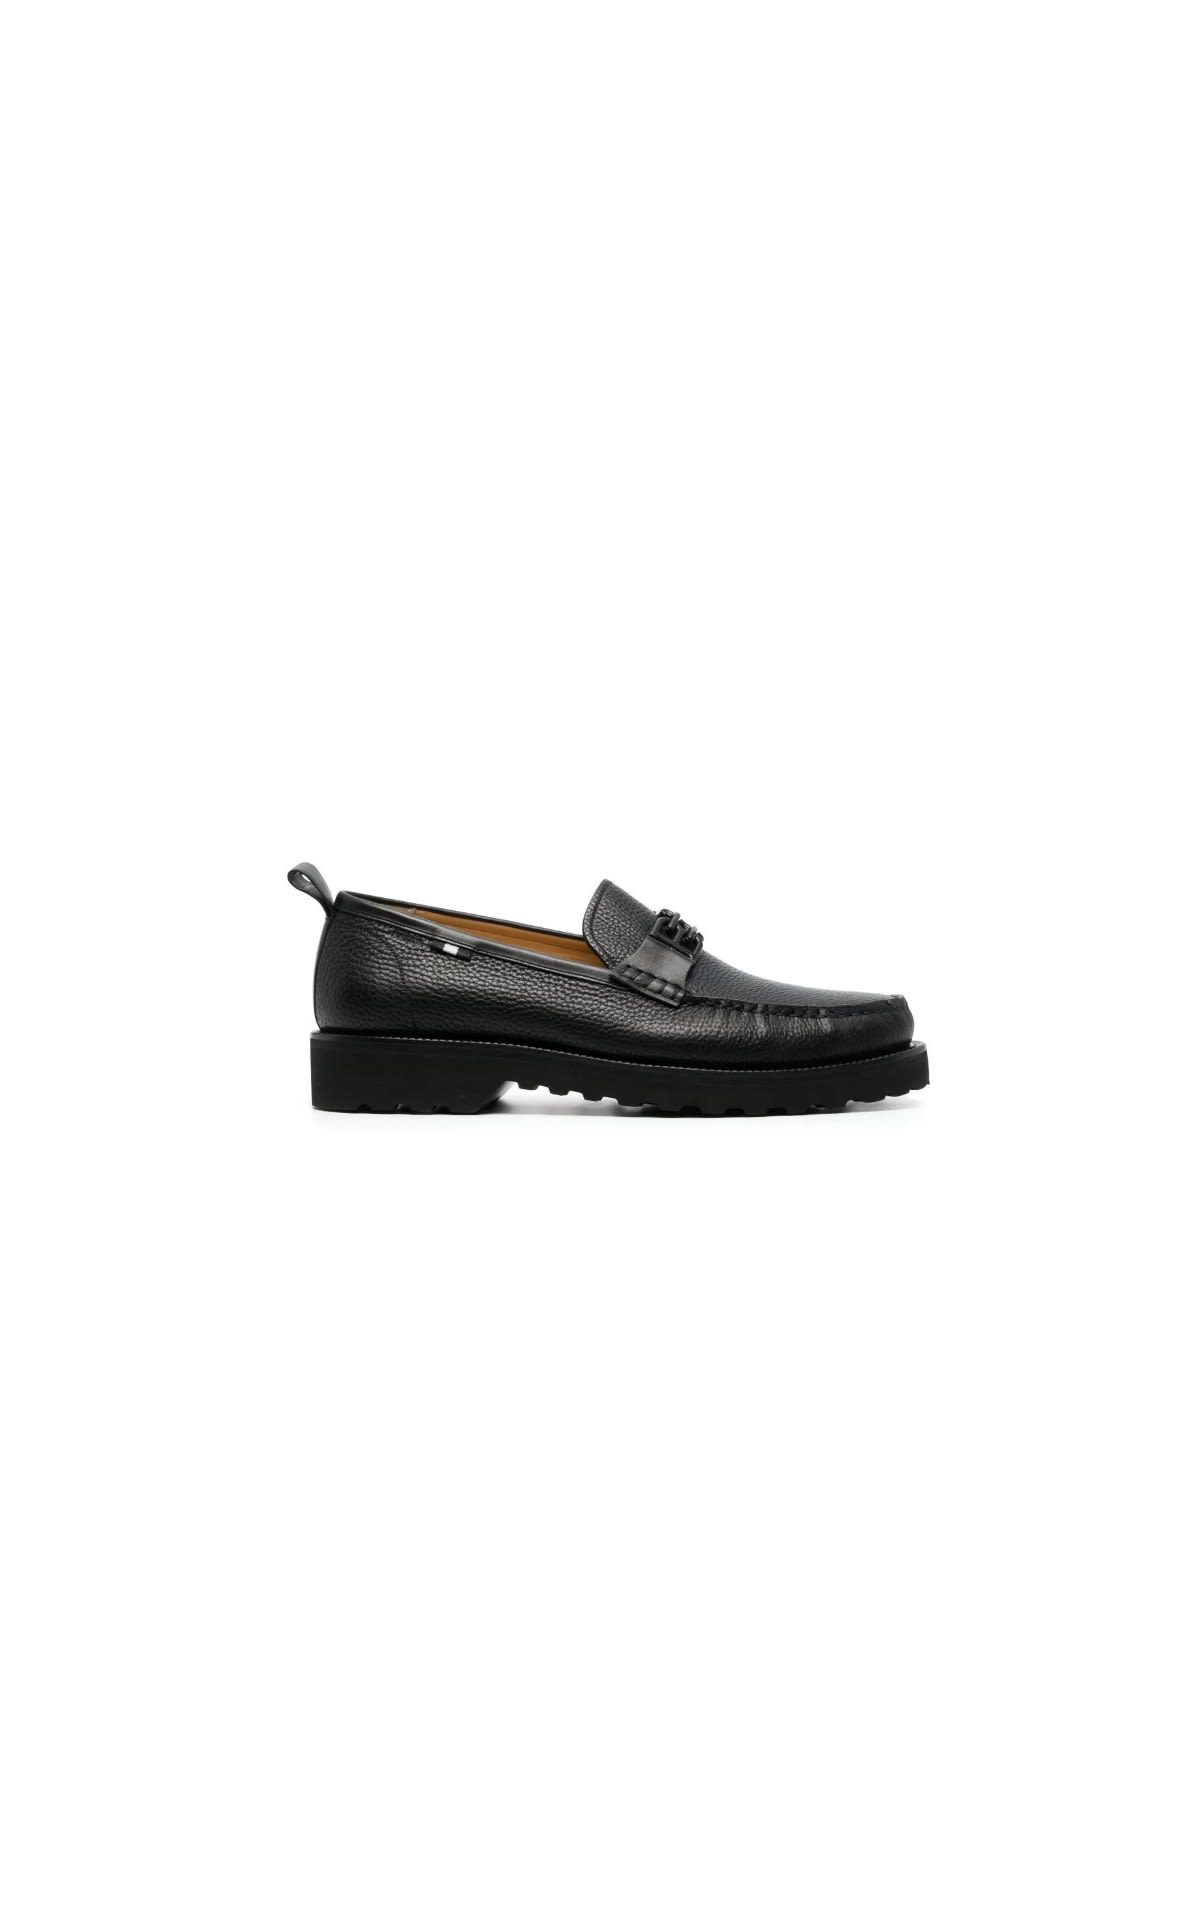 Bally Nolam leather loafers from Bicester Village